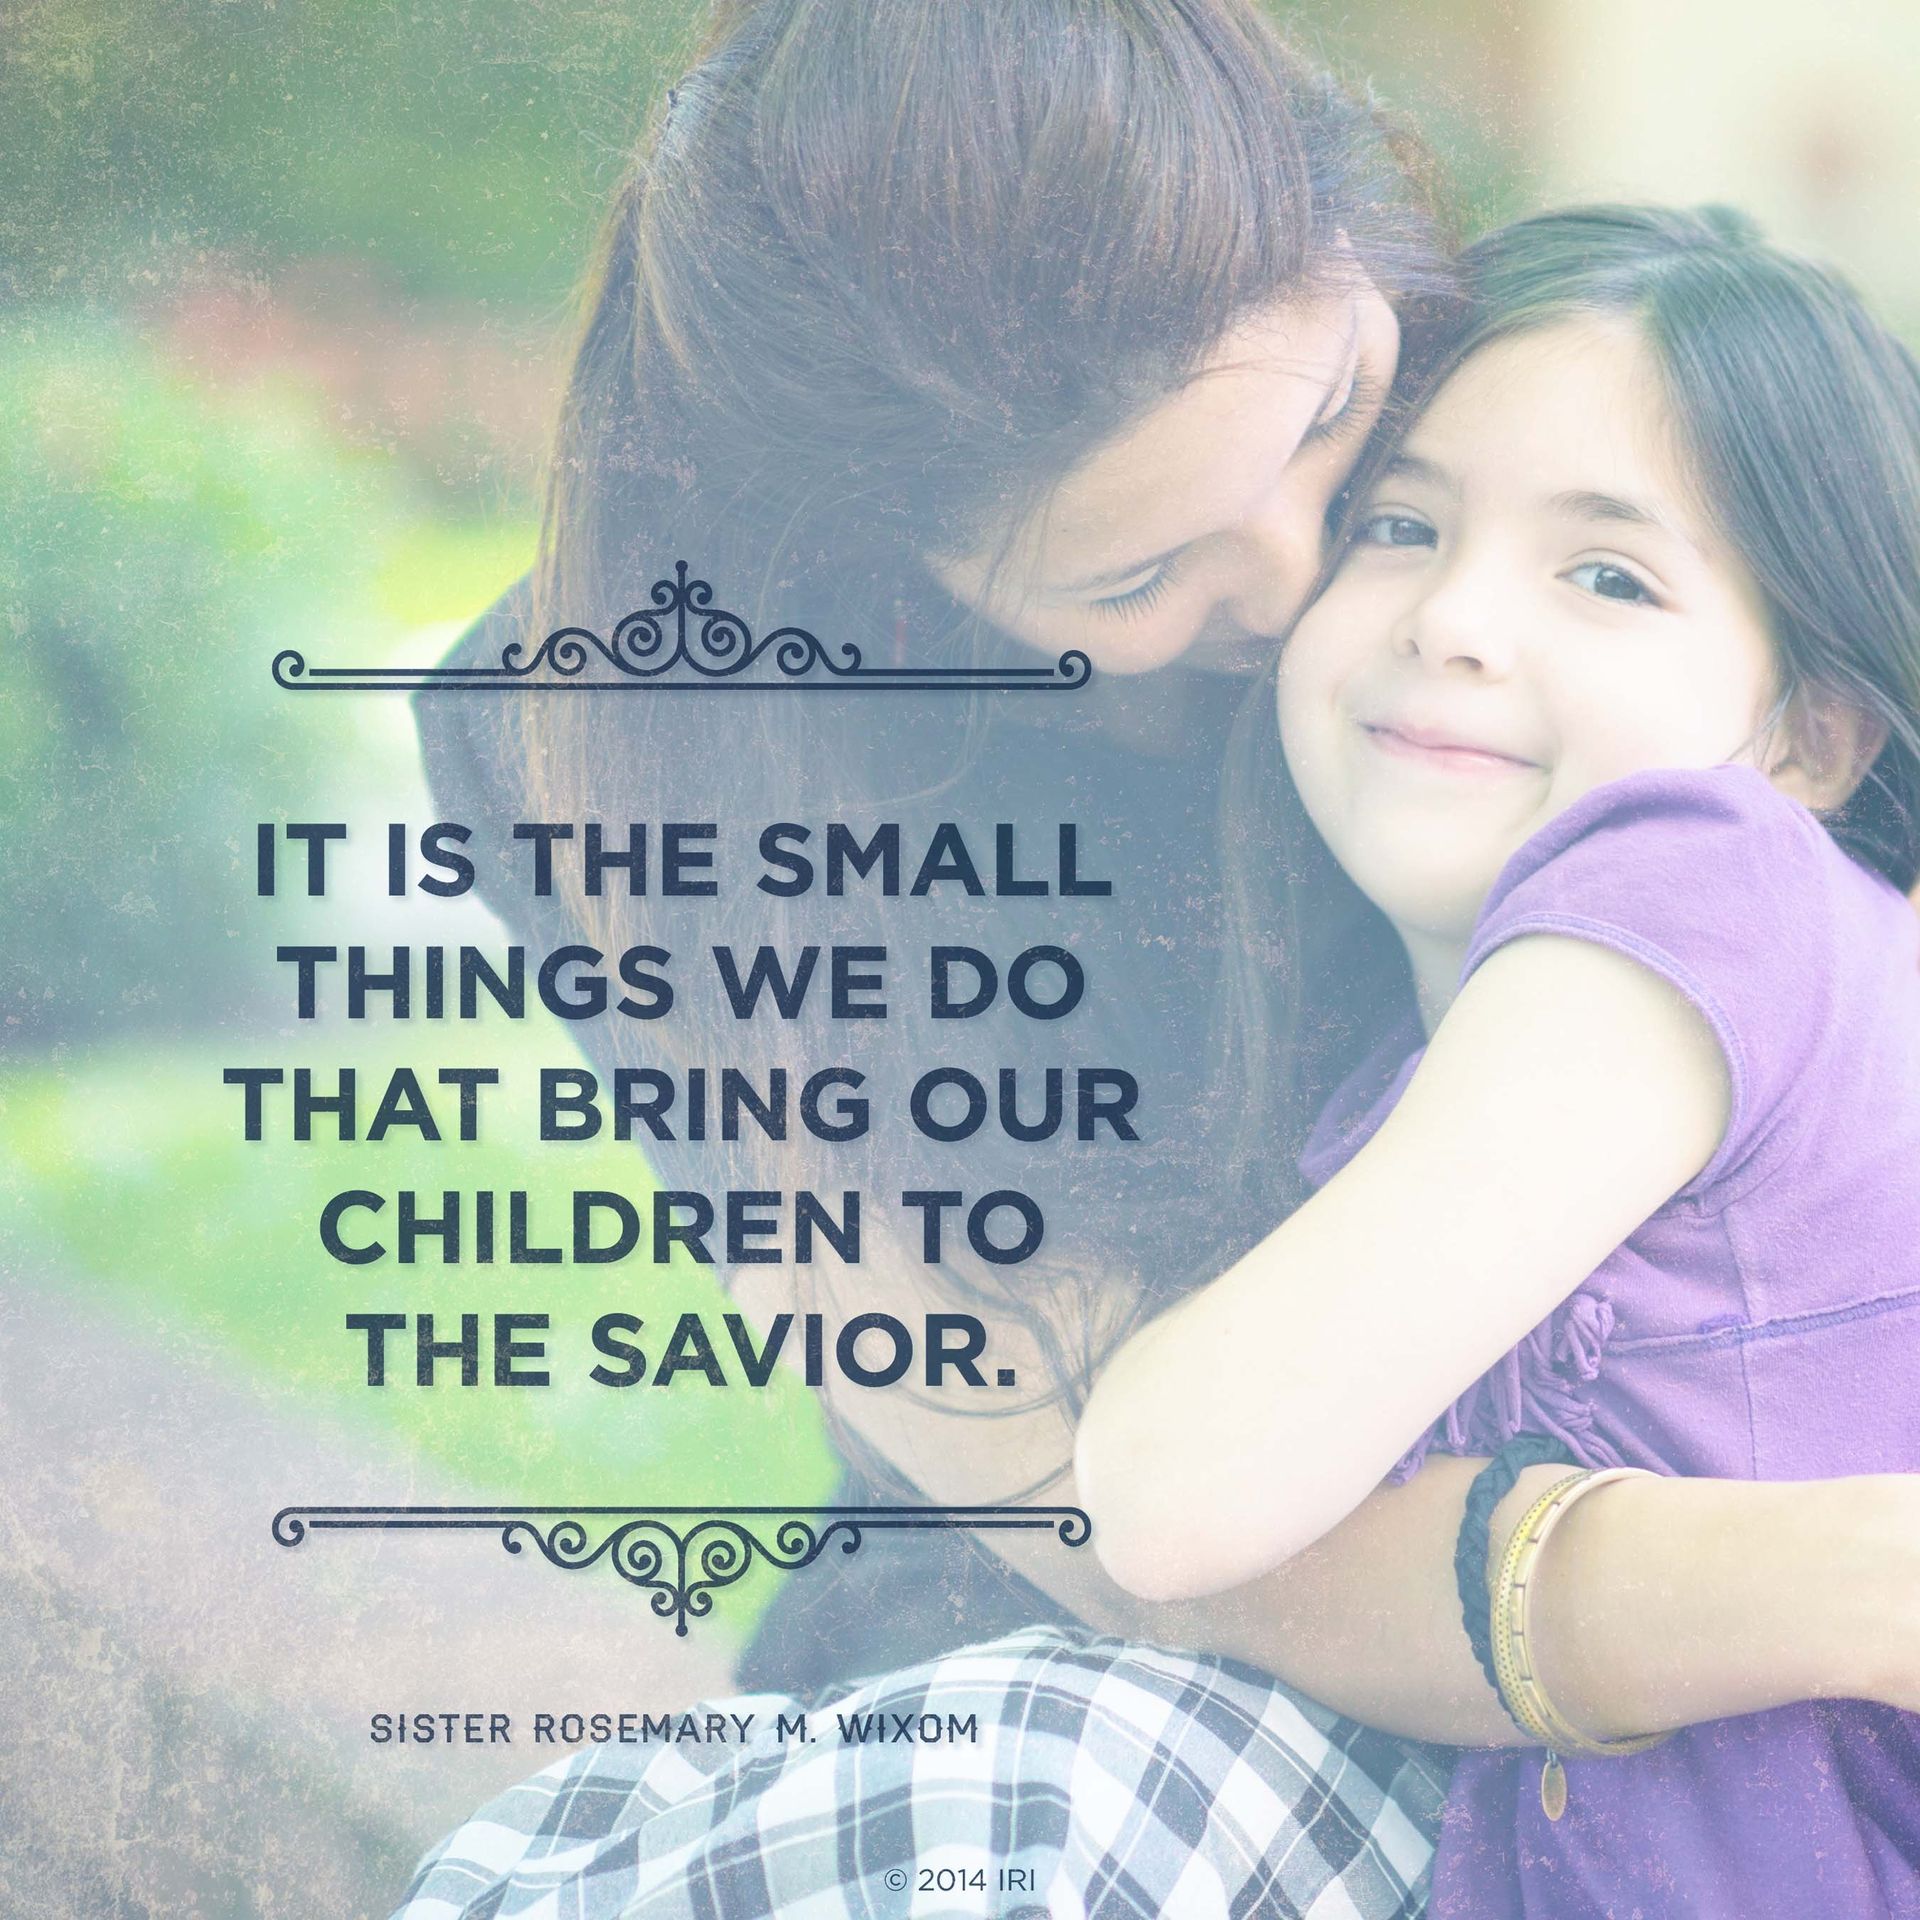 “It is the small things we do that bring our children to the Savior.”—Sister Rosemary M. Wixom, “Primary Leaders Encourage Families to Focus on the Savior”